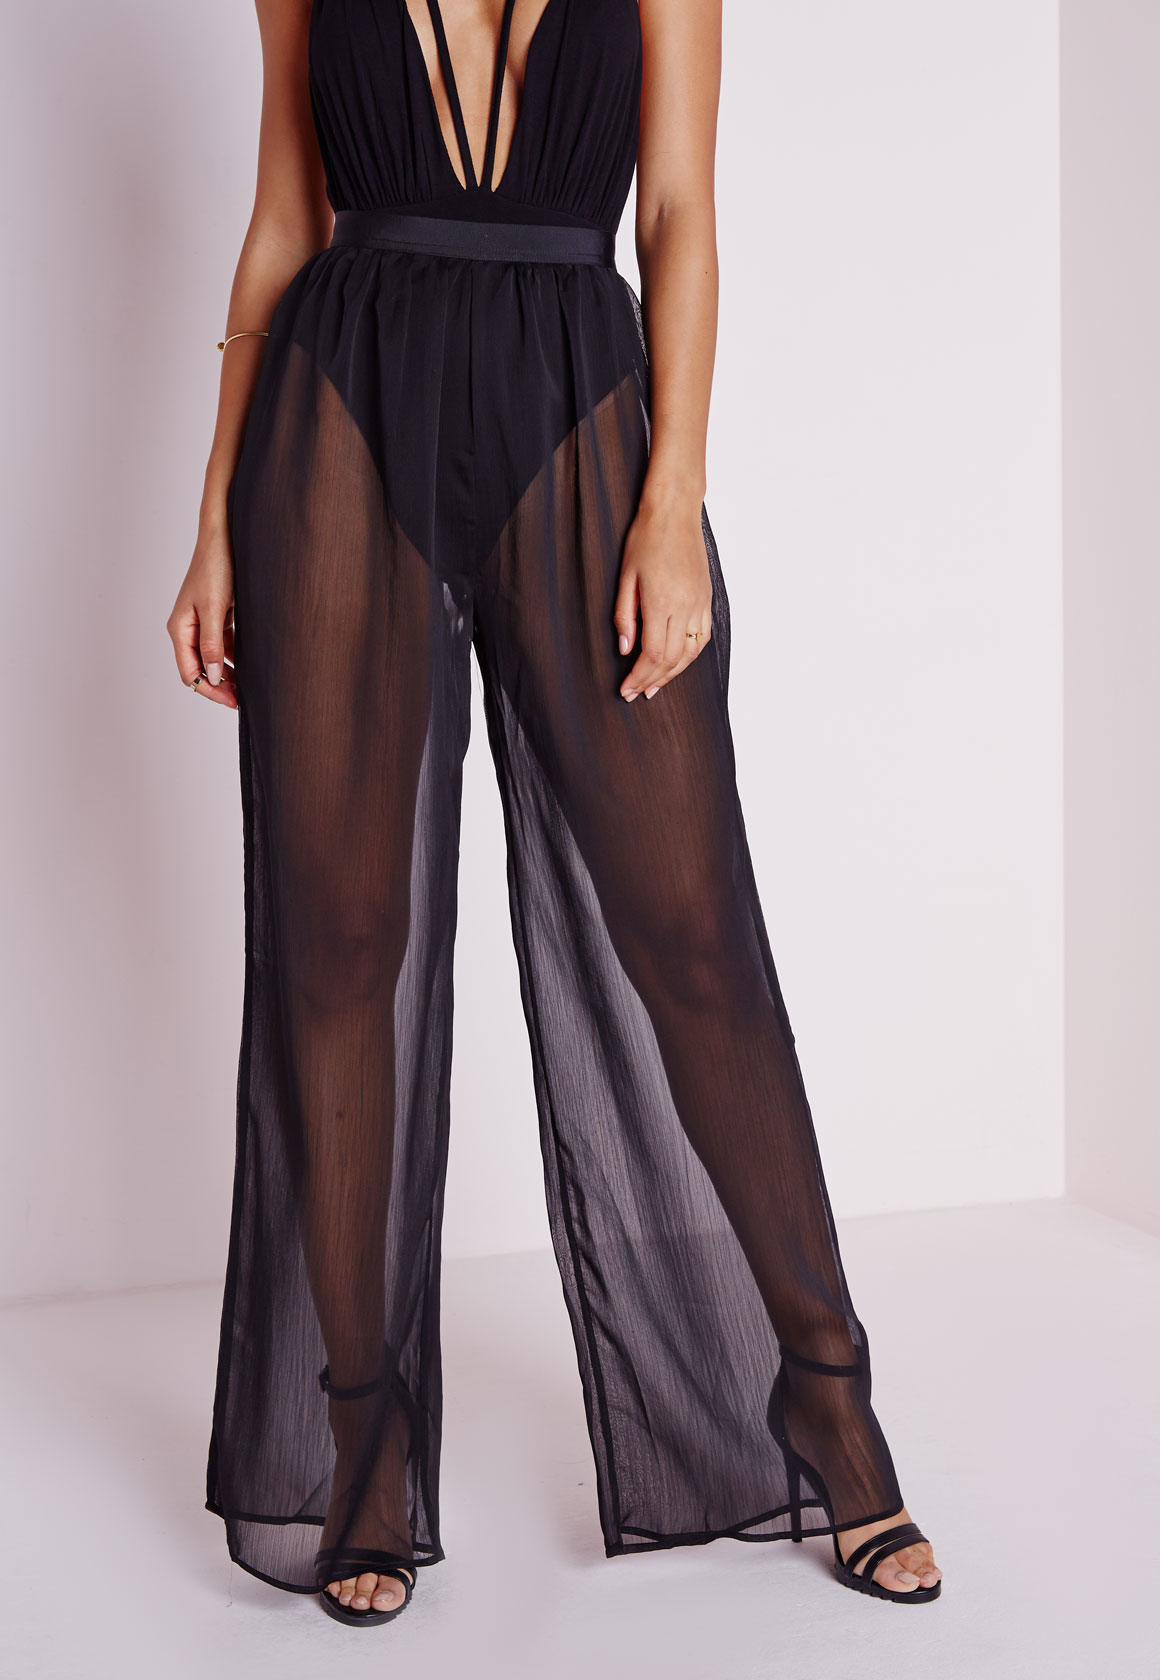 Lyst - Missguided Sheer Pleated Wide Leg Trousers Black in Black